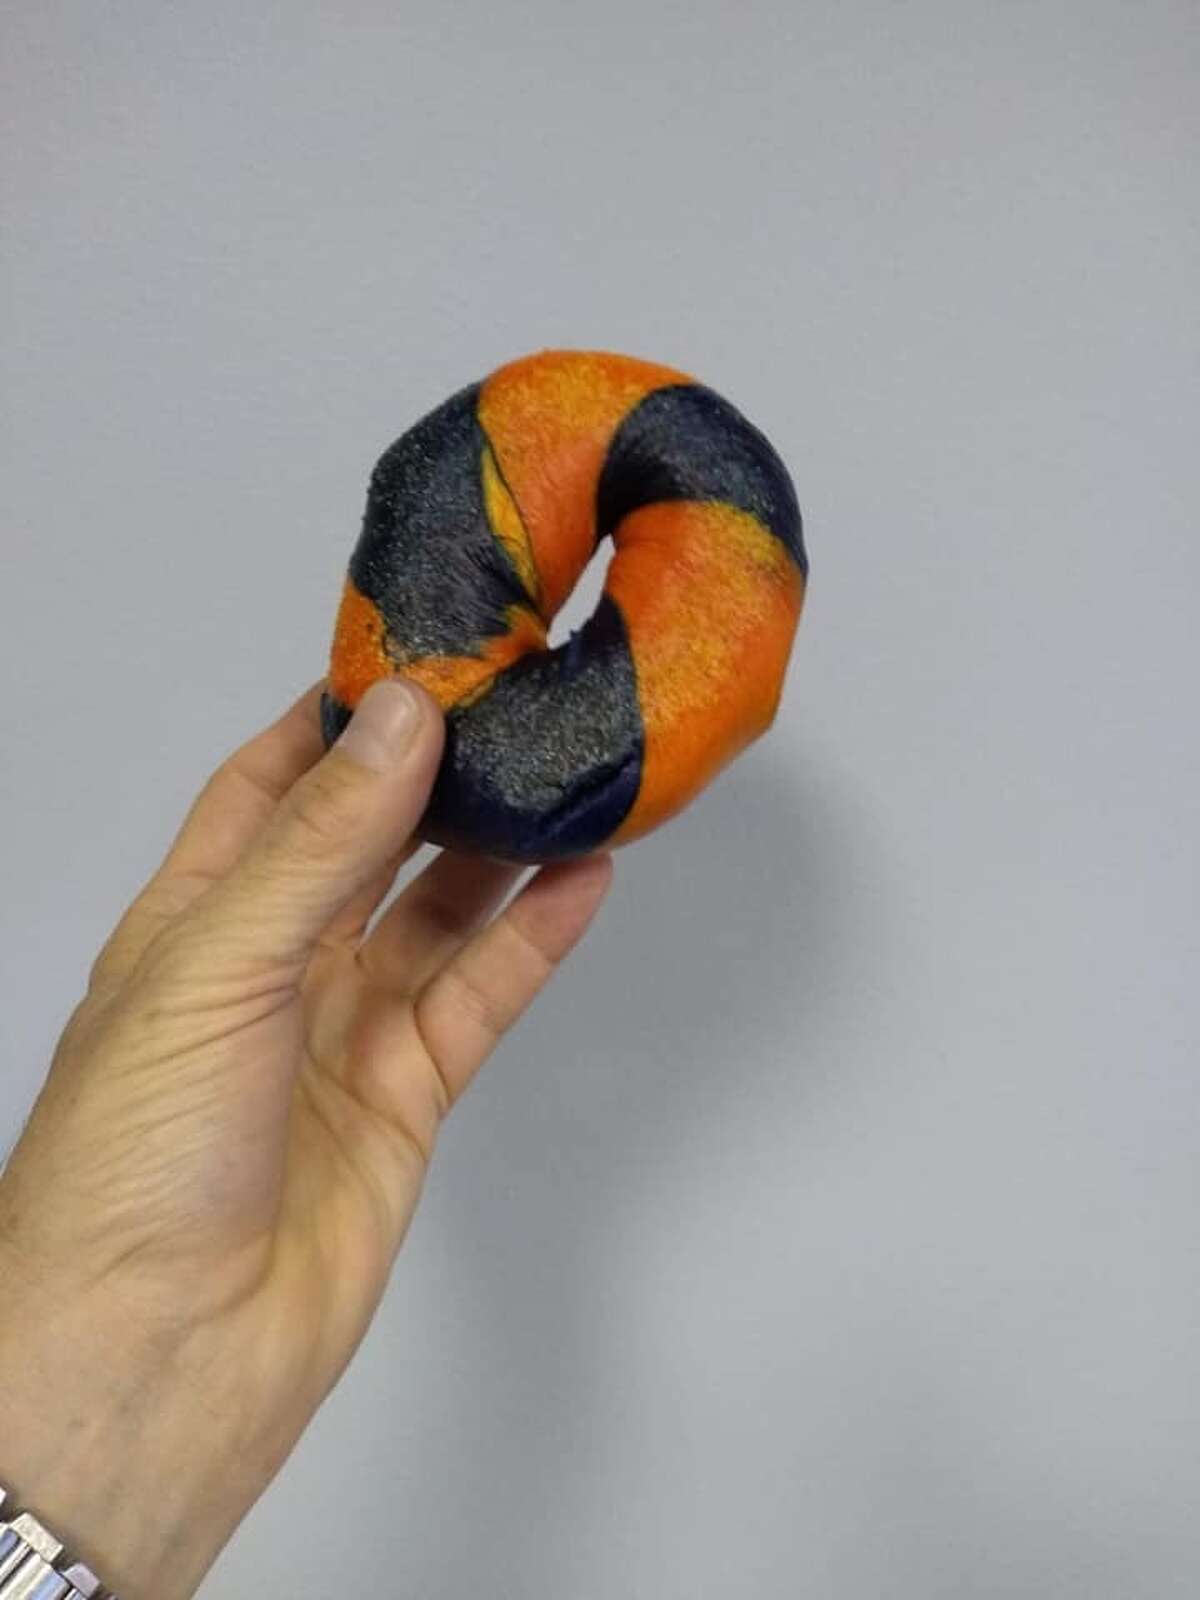 New York Deli & Coffee Shop, 9720 Hillcroft, is making Astros-themed bagels fashioned with orange and blue dough, priced at $1 per bagel or $11.50 per dozen to be offered through the 2019 World Series.